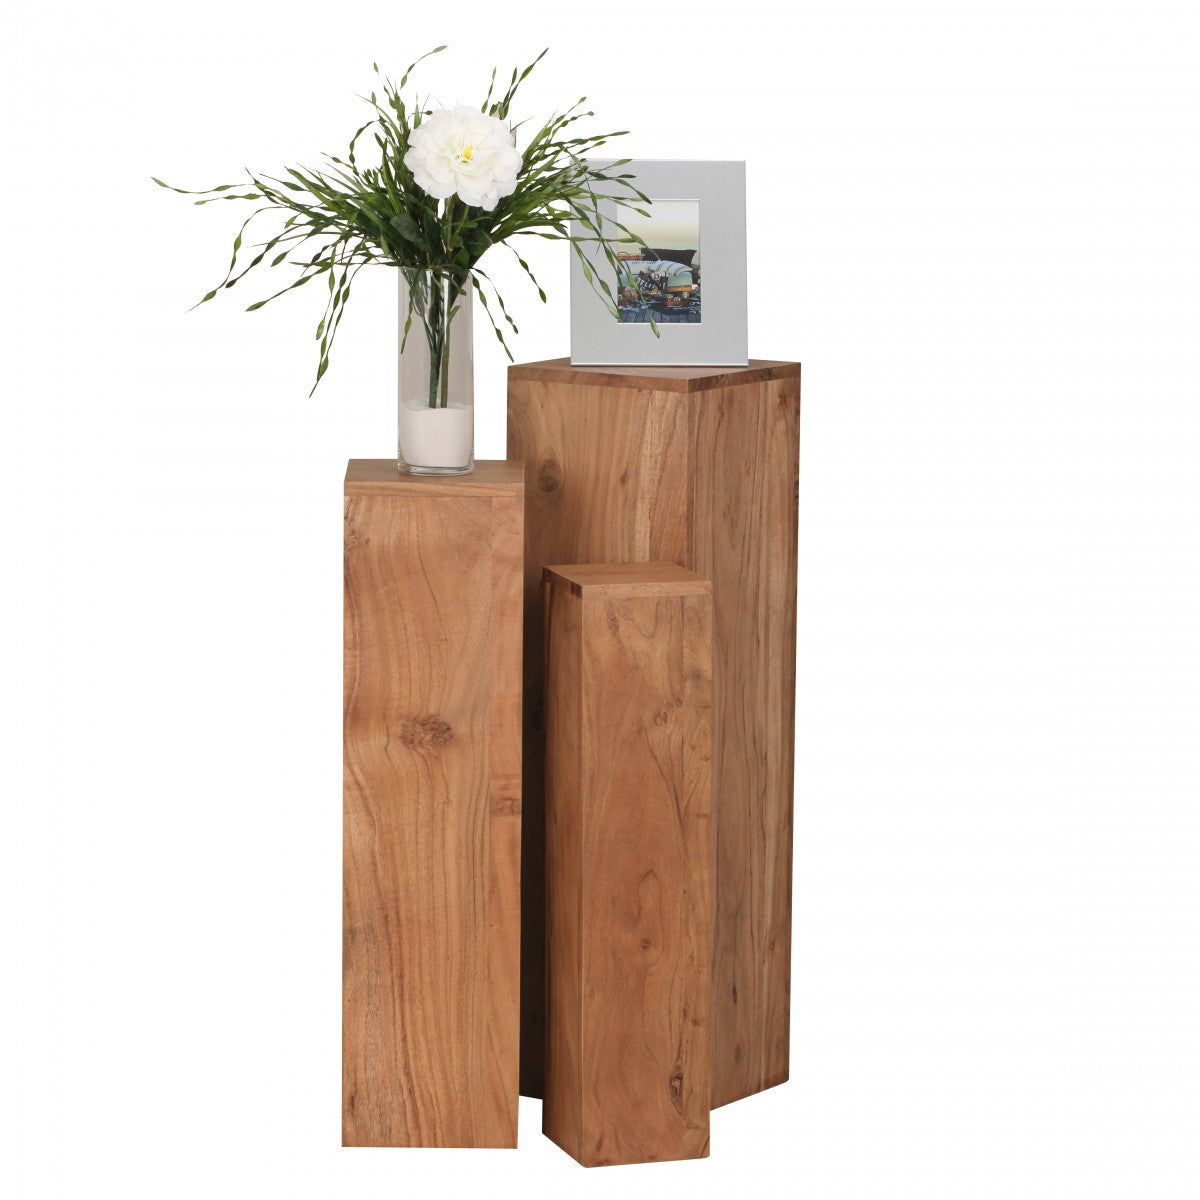 Nancy's Biloxi Side Tables - Set Of 3 - Decoration Block - Elongated Side Table - Solid Wood - Acacia - Brown